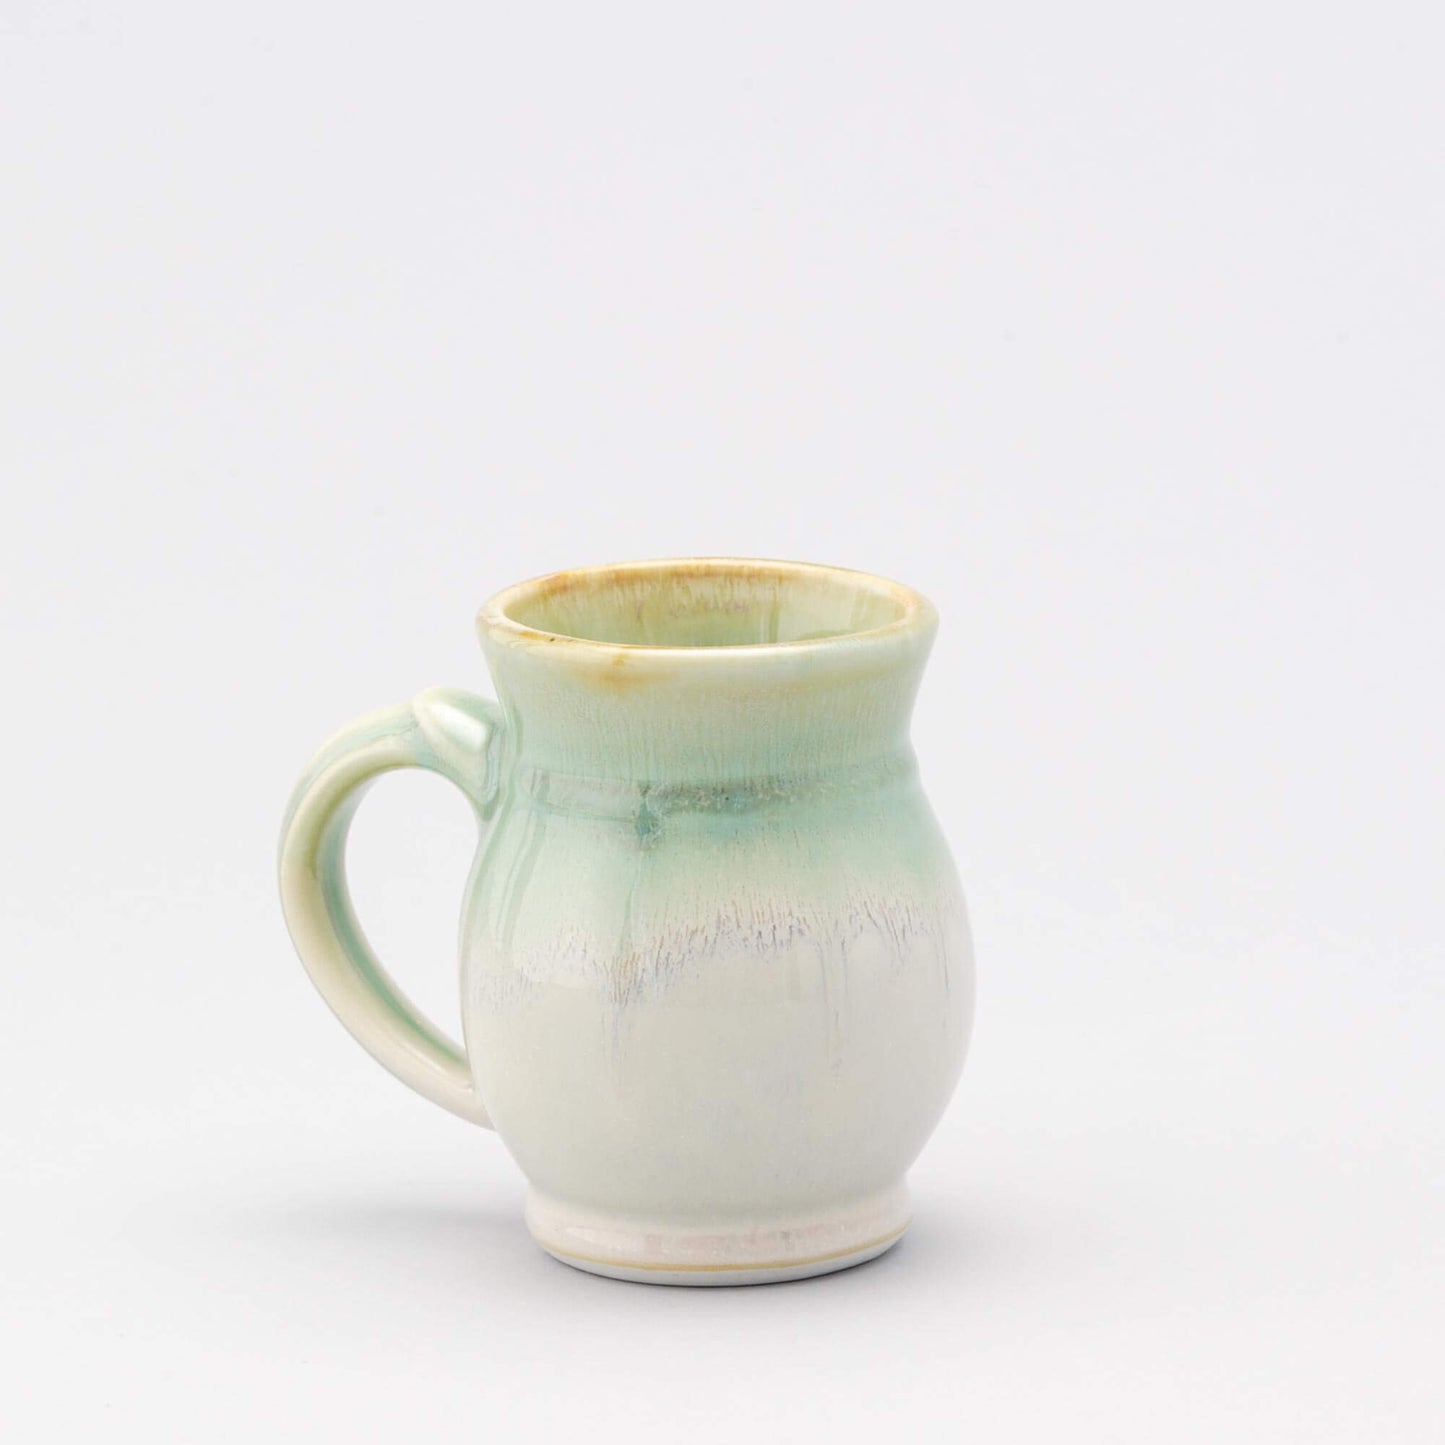 Handmade Pottery Curvy Mug made by Georgetown Pottery in Maine Ivory & Green Orible